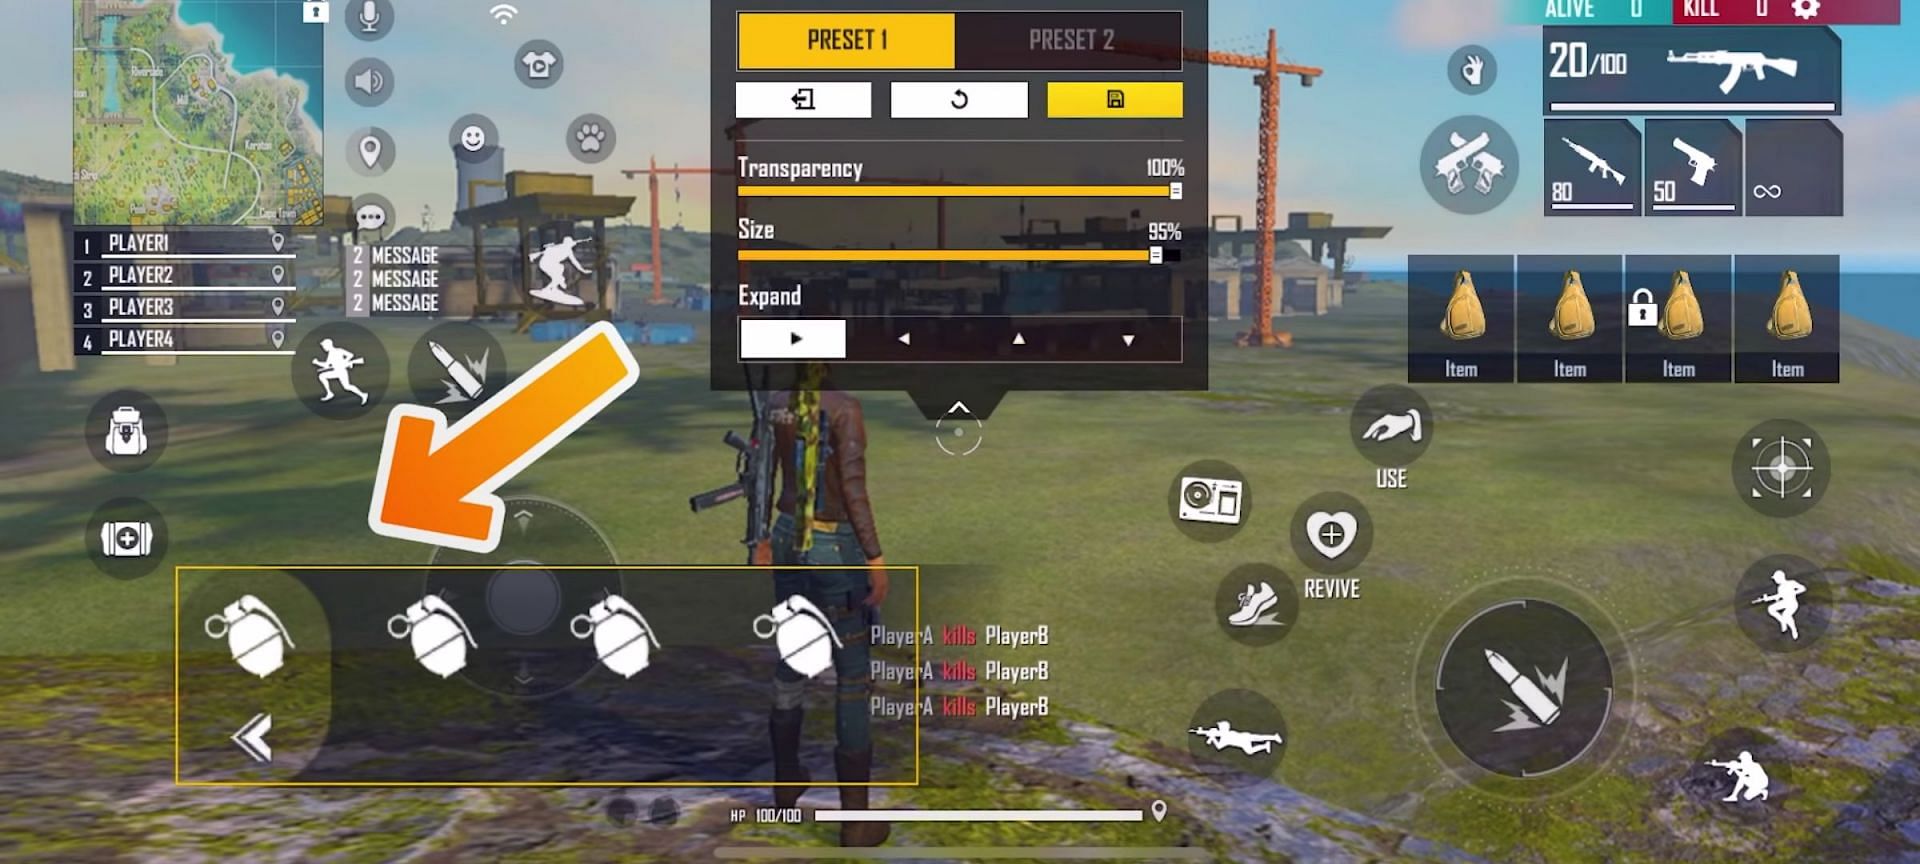 Best Free Fire HUD settings for aggressive players (Image via Garena)